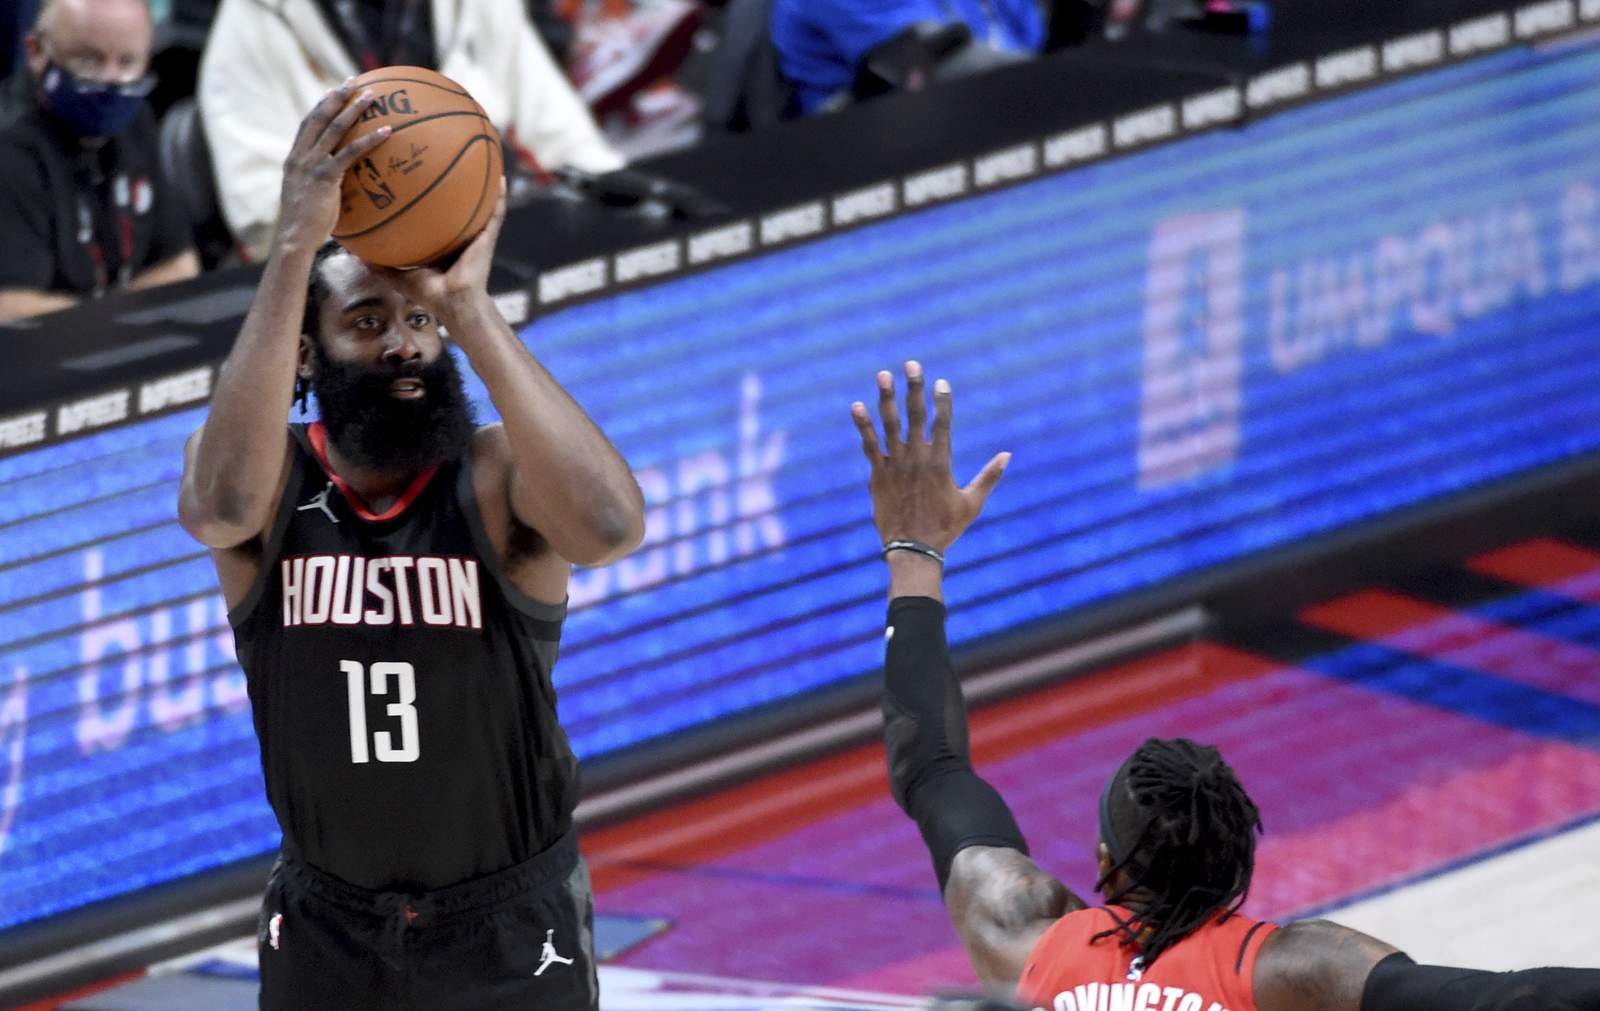 NBA fines 76ers' Daryl Morey $50,000 for tweet about Harden